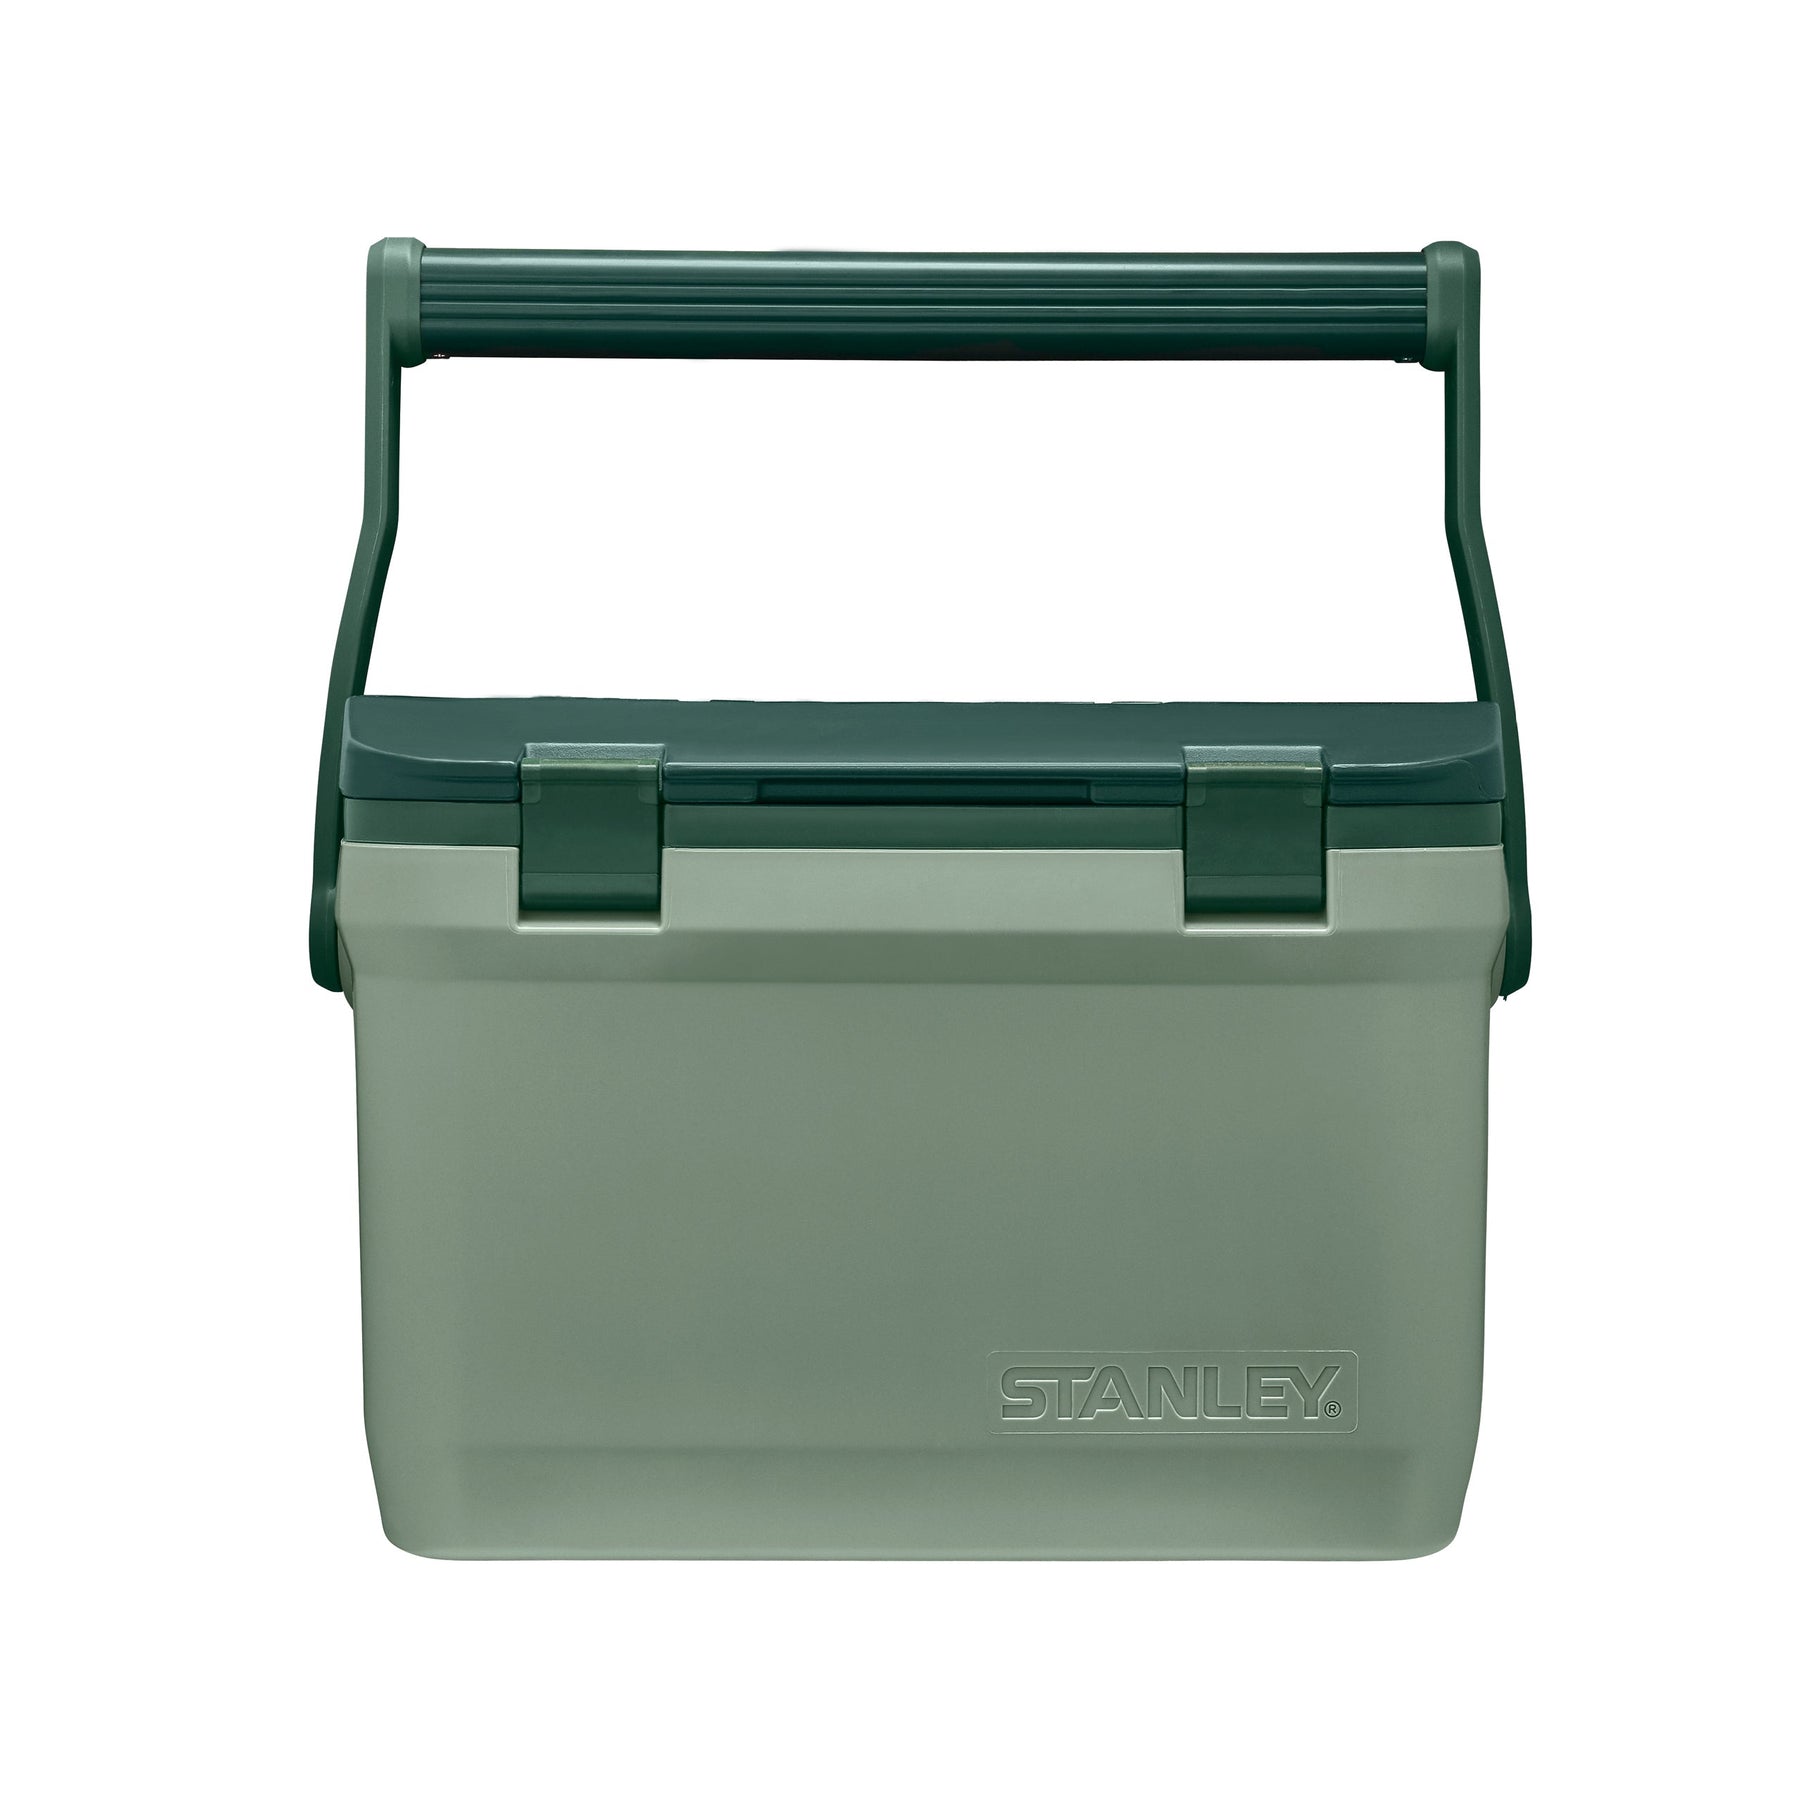 Stanley The Easy Carry Outdoor Cooler 15.1L Green - Stanley The Easy Carry  Outdoor Cooler 15.1L Green